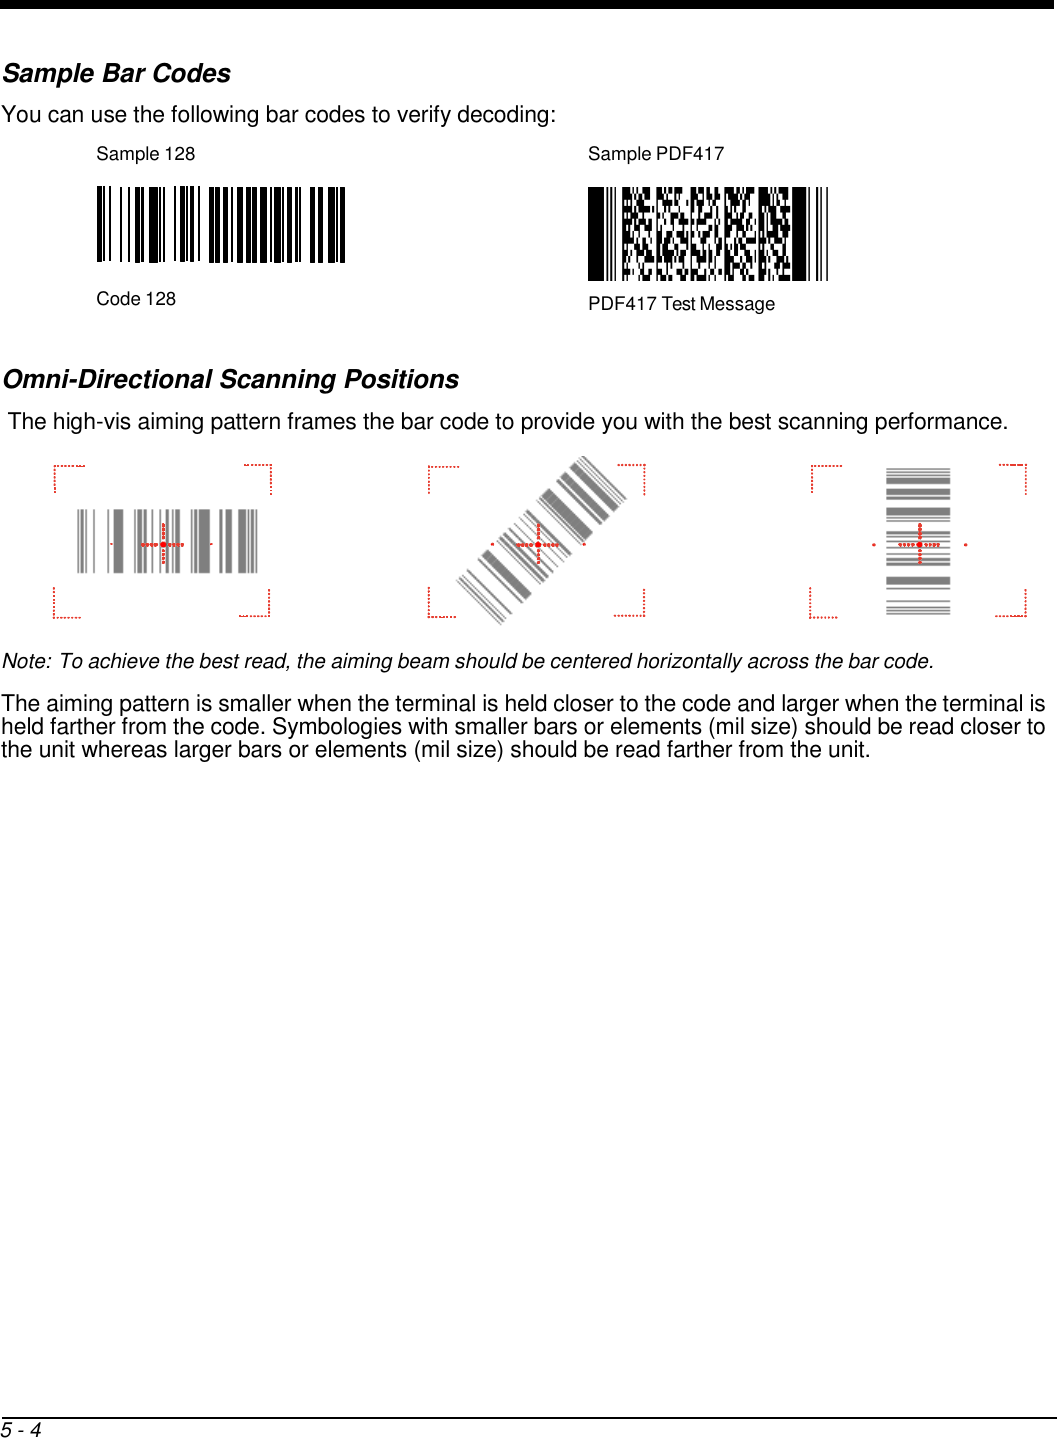      Sample Bar Codes You can use the following bar codes to verify decoding: Sample 128  Sample PDF417        Code 128  PDF417 Test Message   Omni-Directional Scanning Positions The high-vis aiming pattern frames the bar code to provide you with the best scanning performance.        Note: To achieve the best read, the aiming beam should be centered horizontally across the bar code.  The aiming pattern is smaller when the terminal is held closer to the code and larger when the terminal is held farther from the code. Symbologies with smaller bars or elements (mil size) should be read closer to the unit whereas larger bars or elements (mil size) should be read farther from the unit.                             5 - 4 